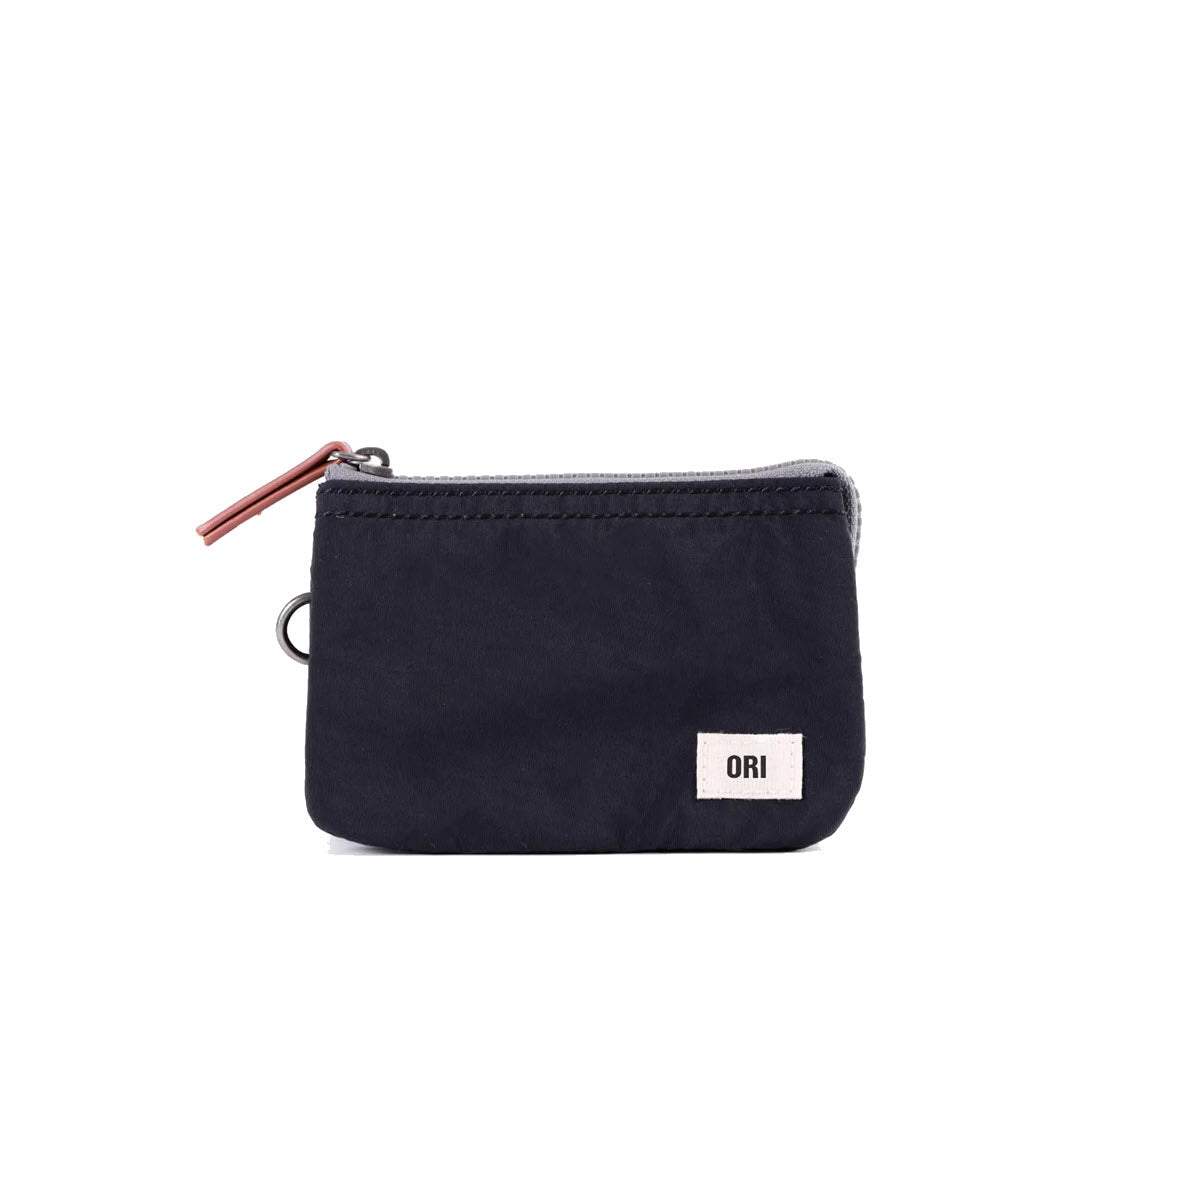 A small black zippered pouch with a label marked "ORI" on the front bottom corner, this ORI LONDON CARNABY SMALL POUCH JET by Ori London is both versatile and durable, perfect for any adventure.